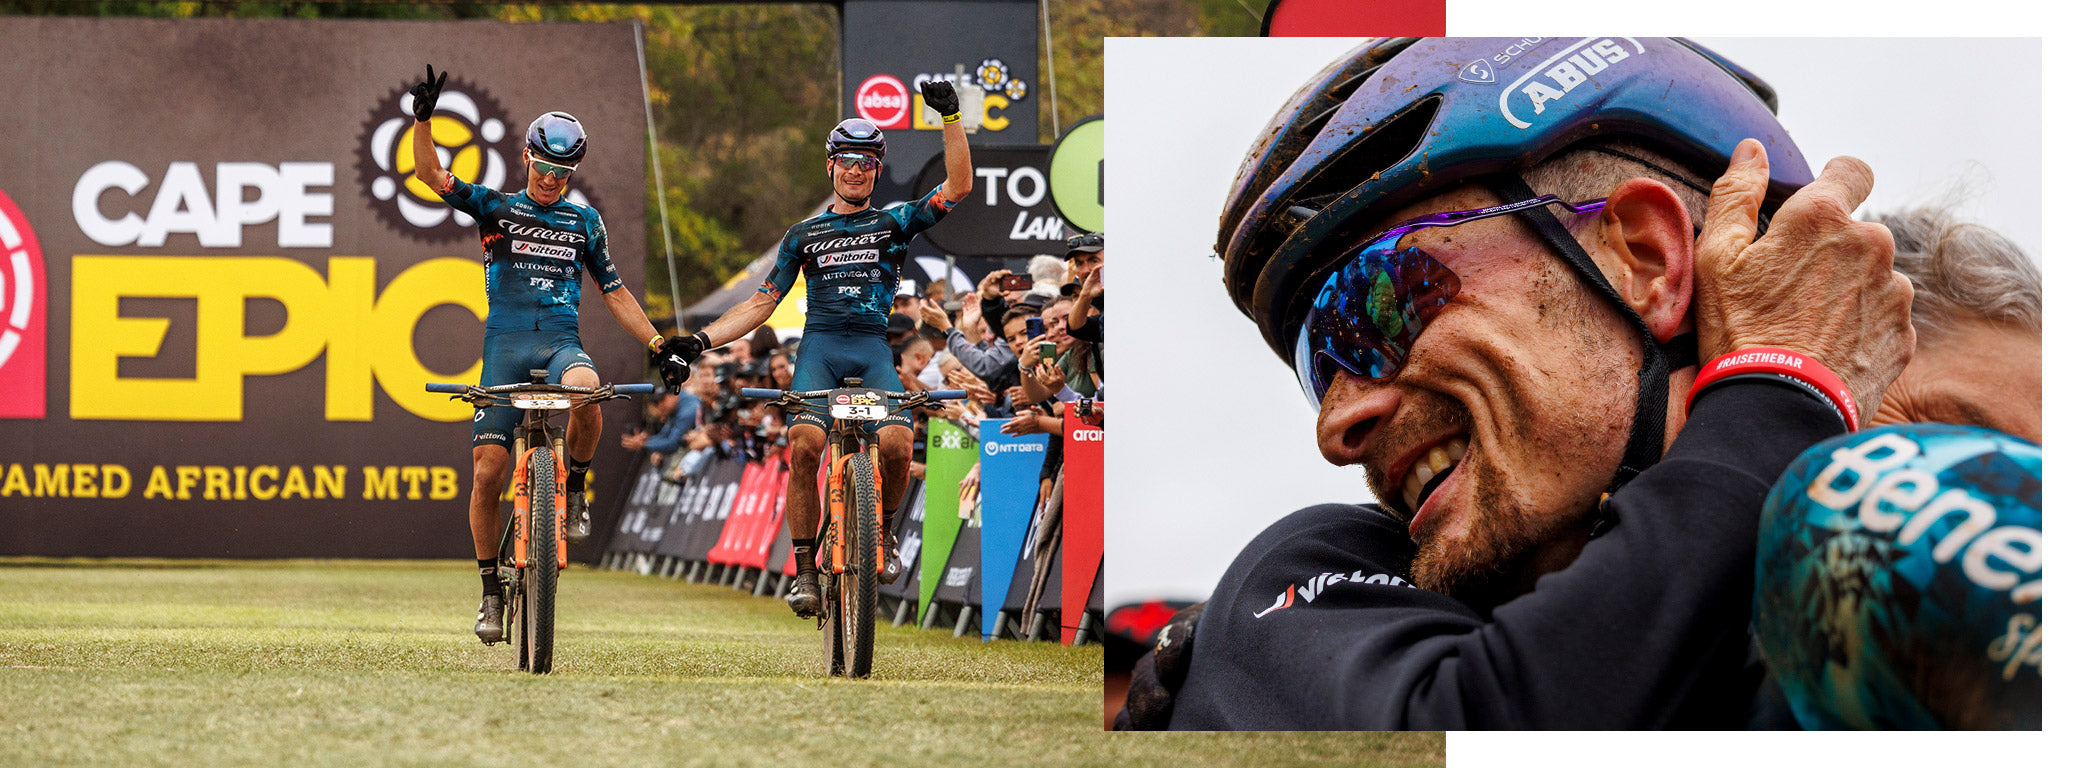 Finish line and salutations after achieving the Cape Epic